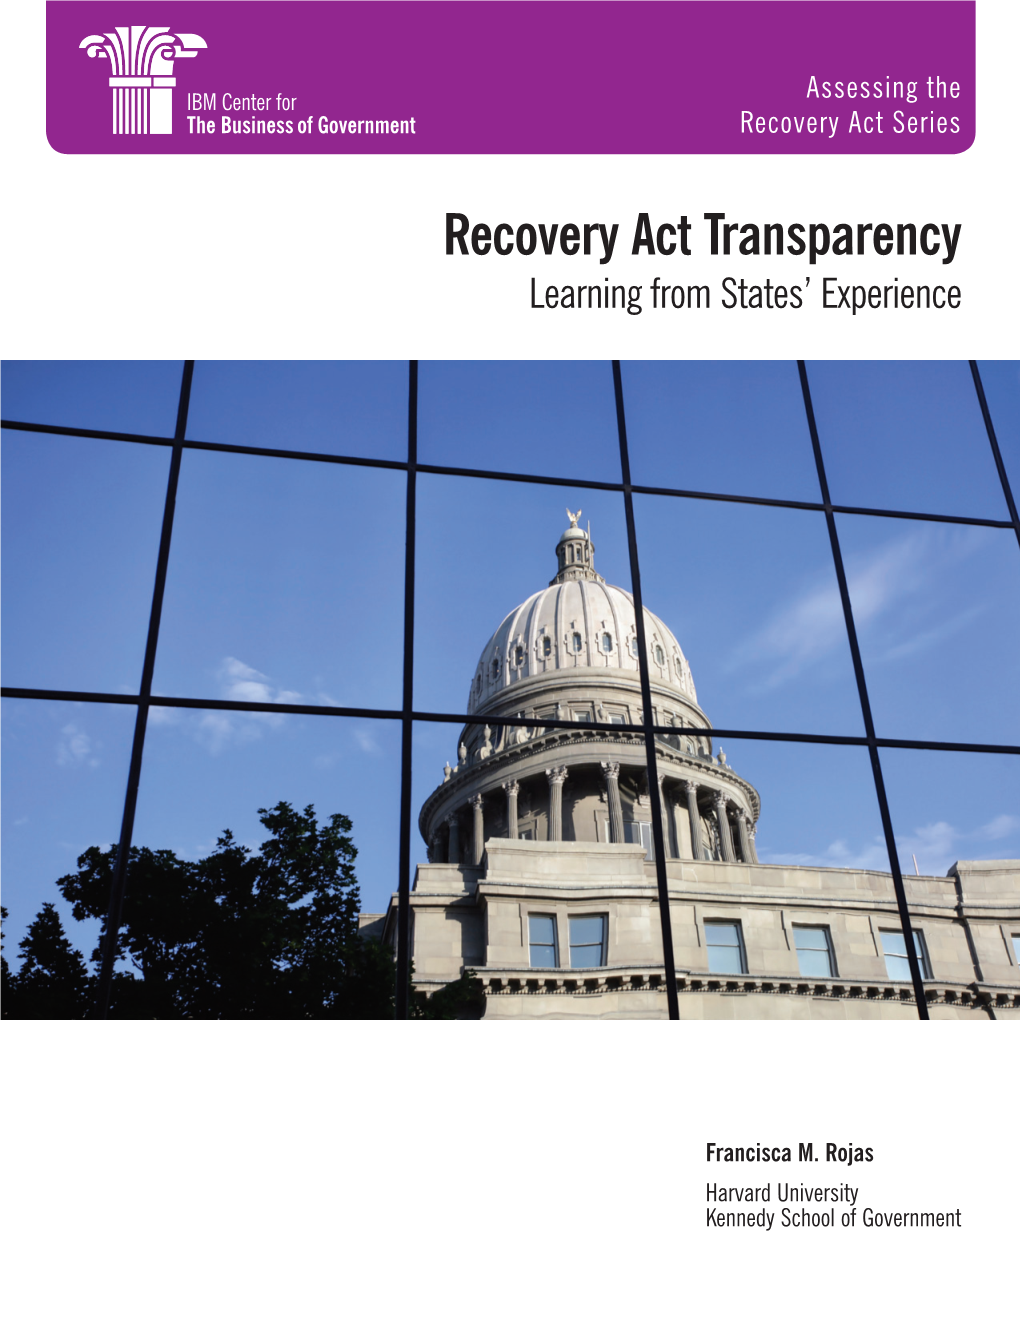 Recovery Act Transparency Learning from States’ Experience